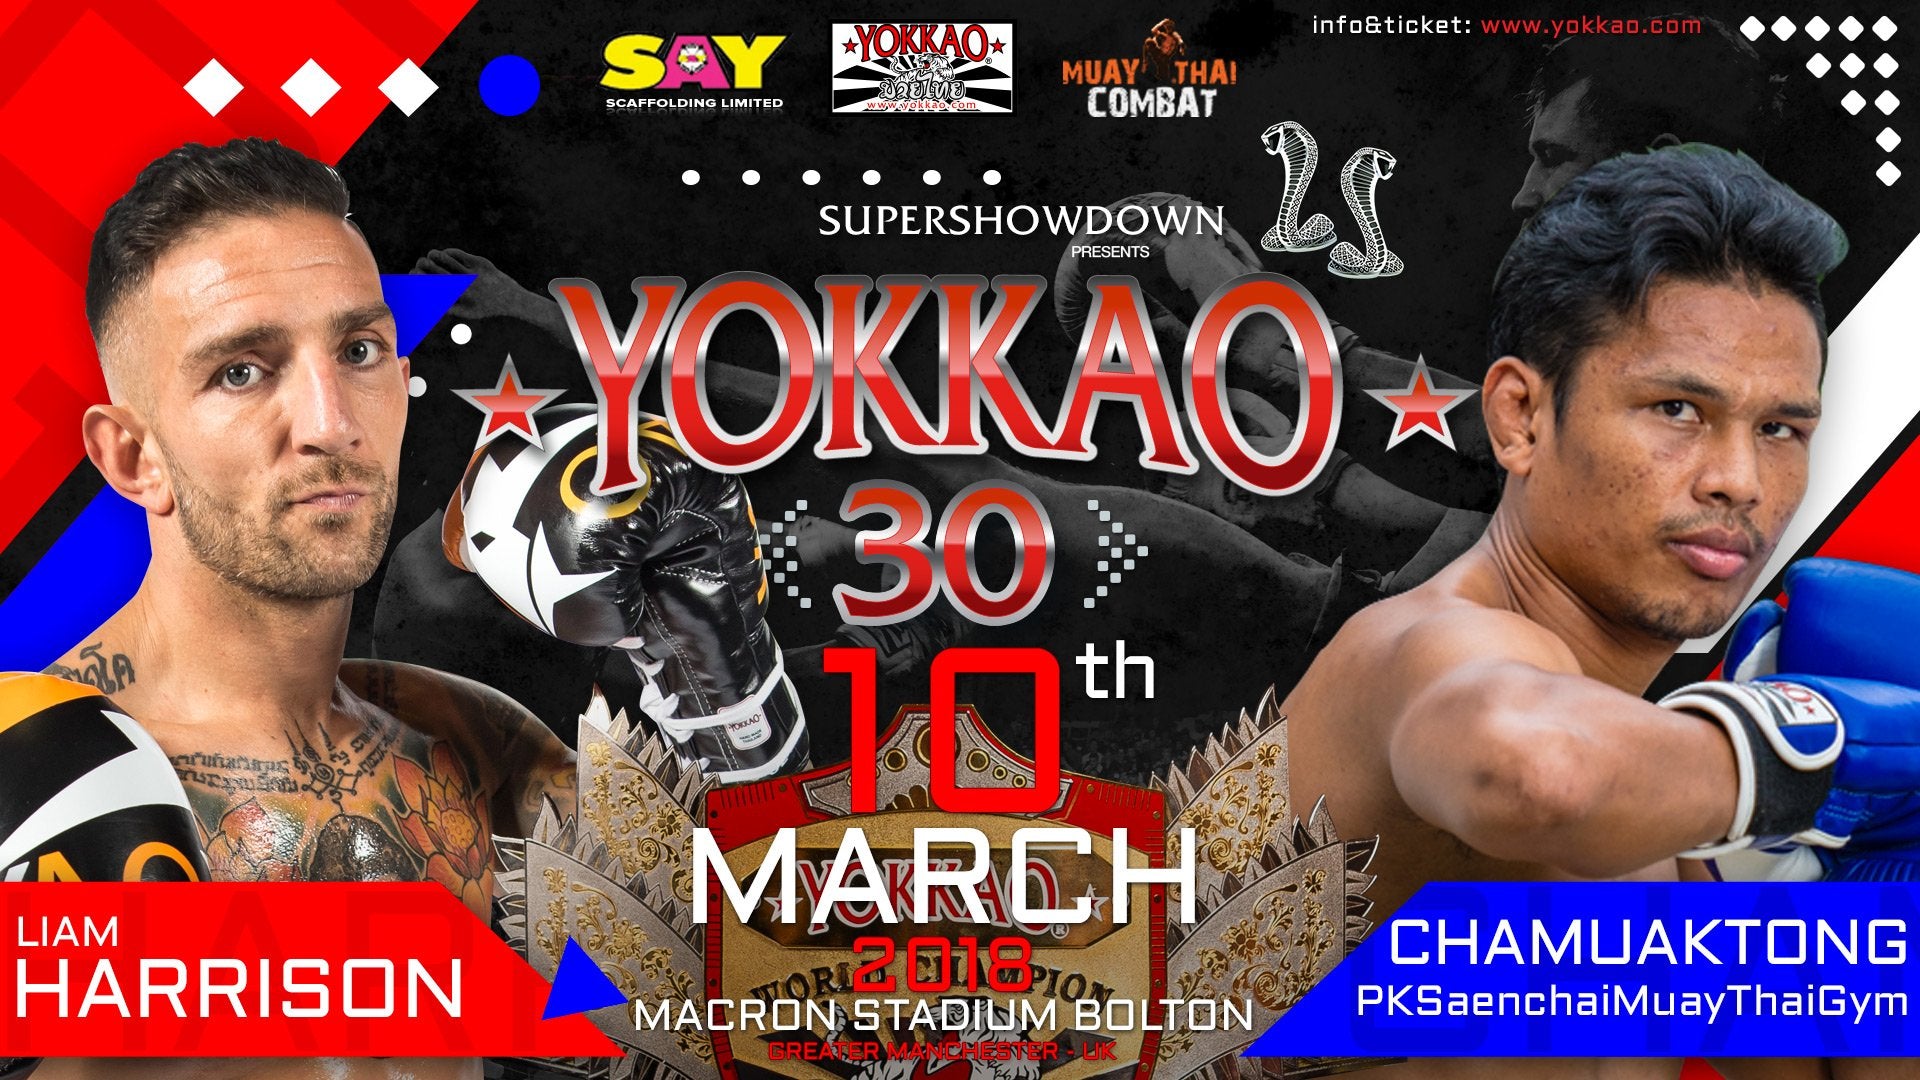 Liam Harrison To Defend Title Against Chamuaktong At YOKKAO 30!